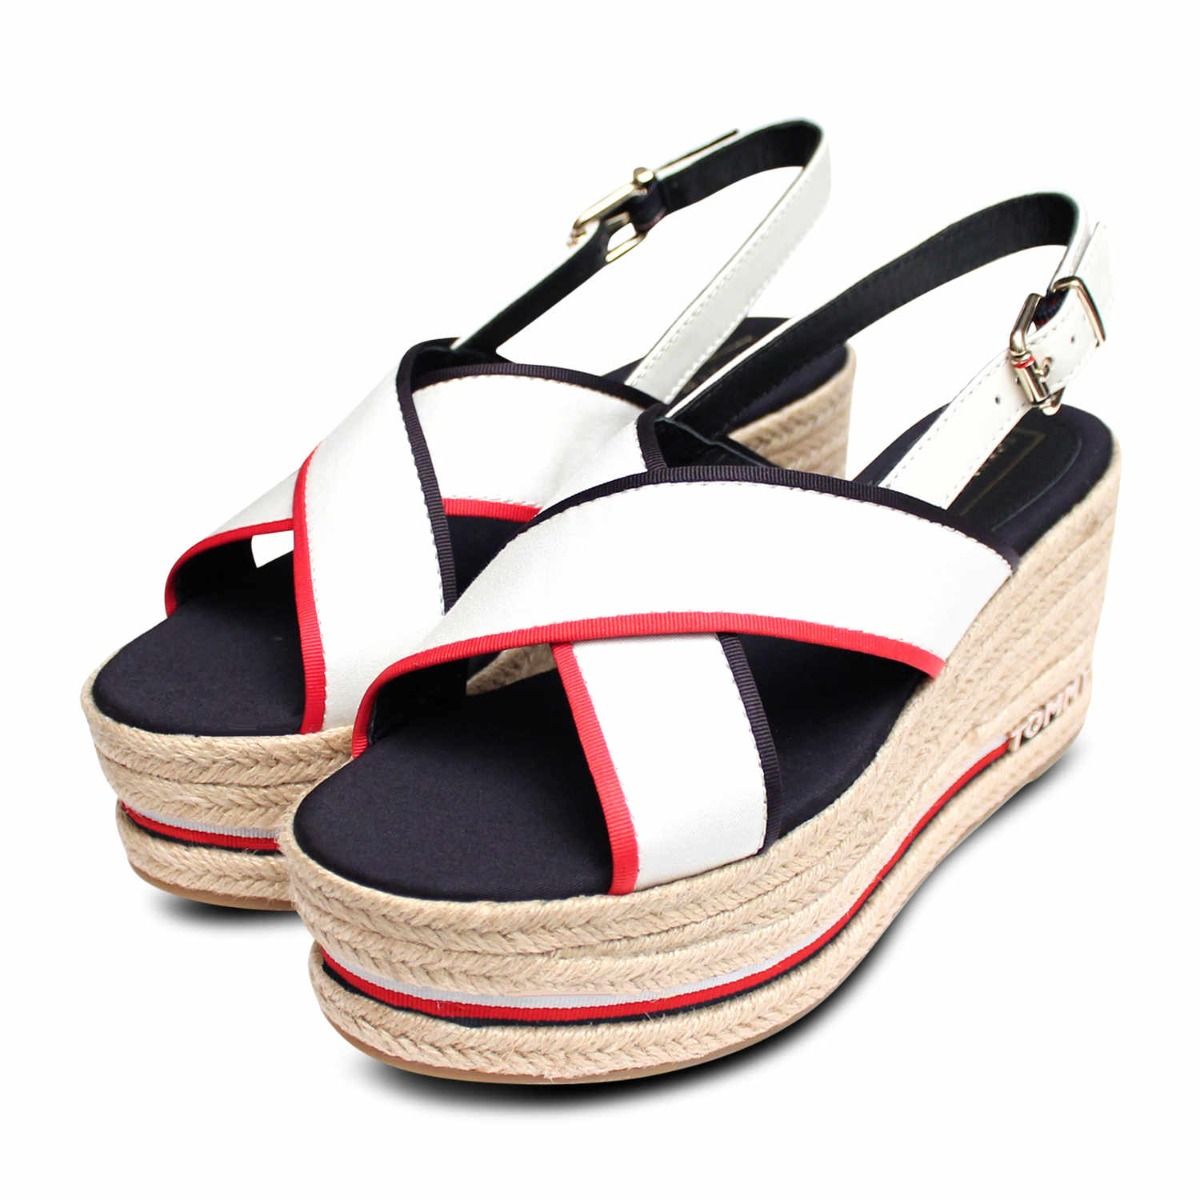 Pair of wedge sandals White, blue and red leather 39 1/…